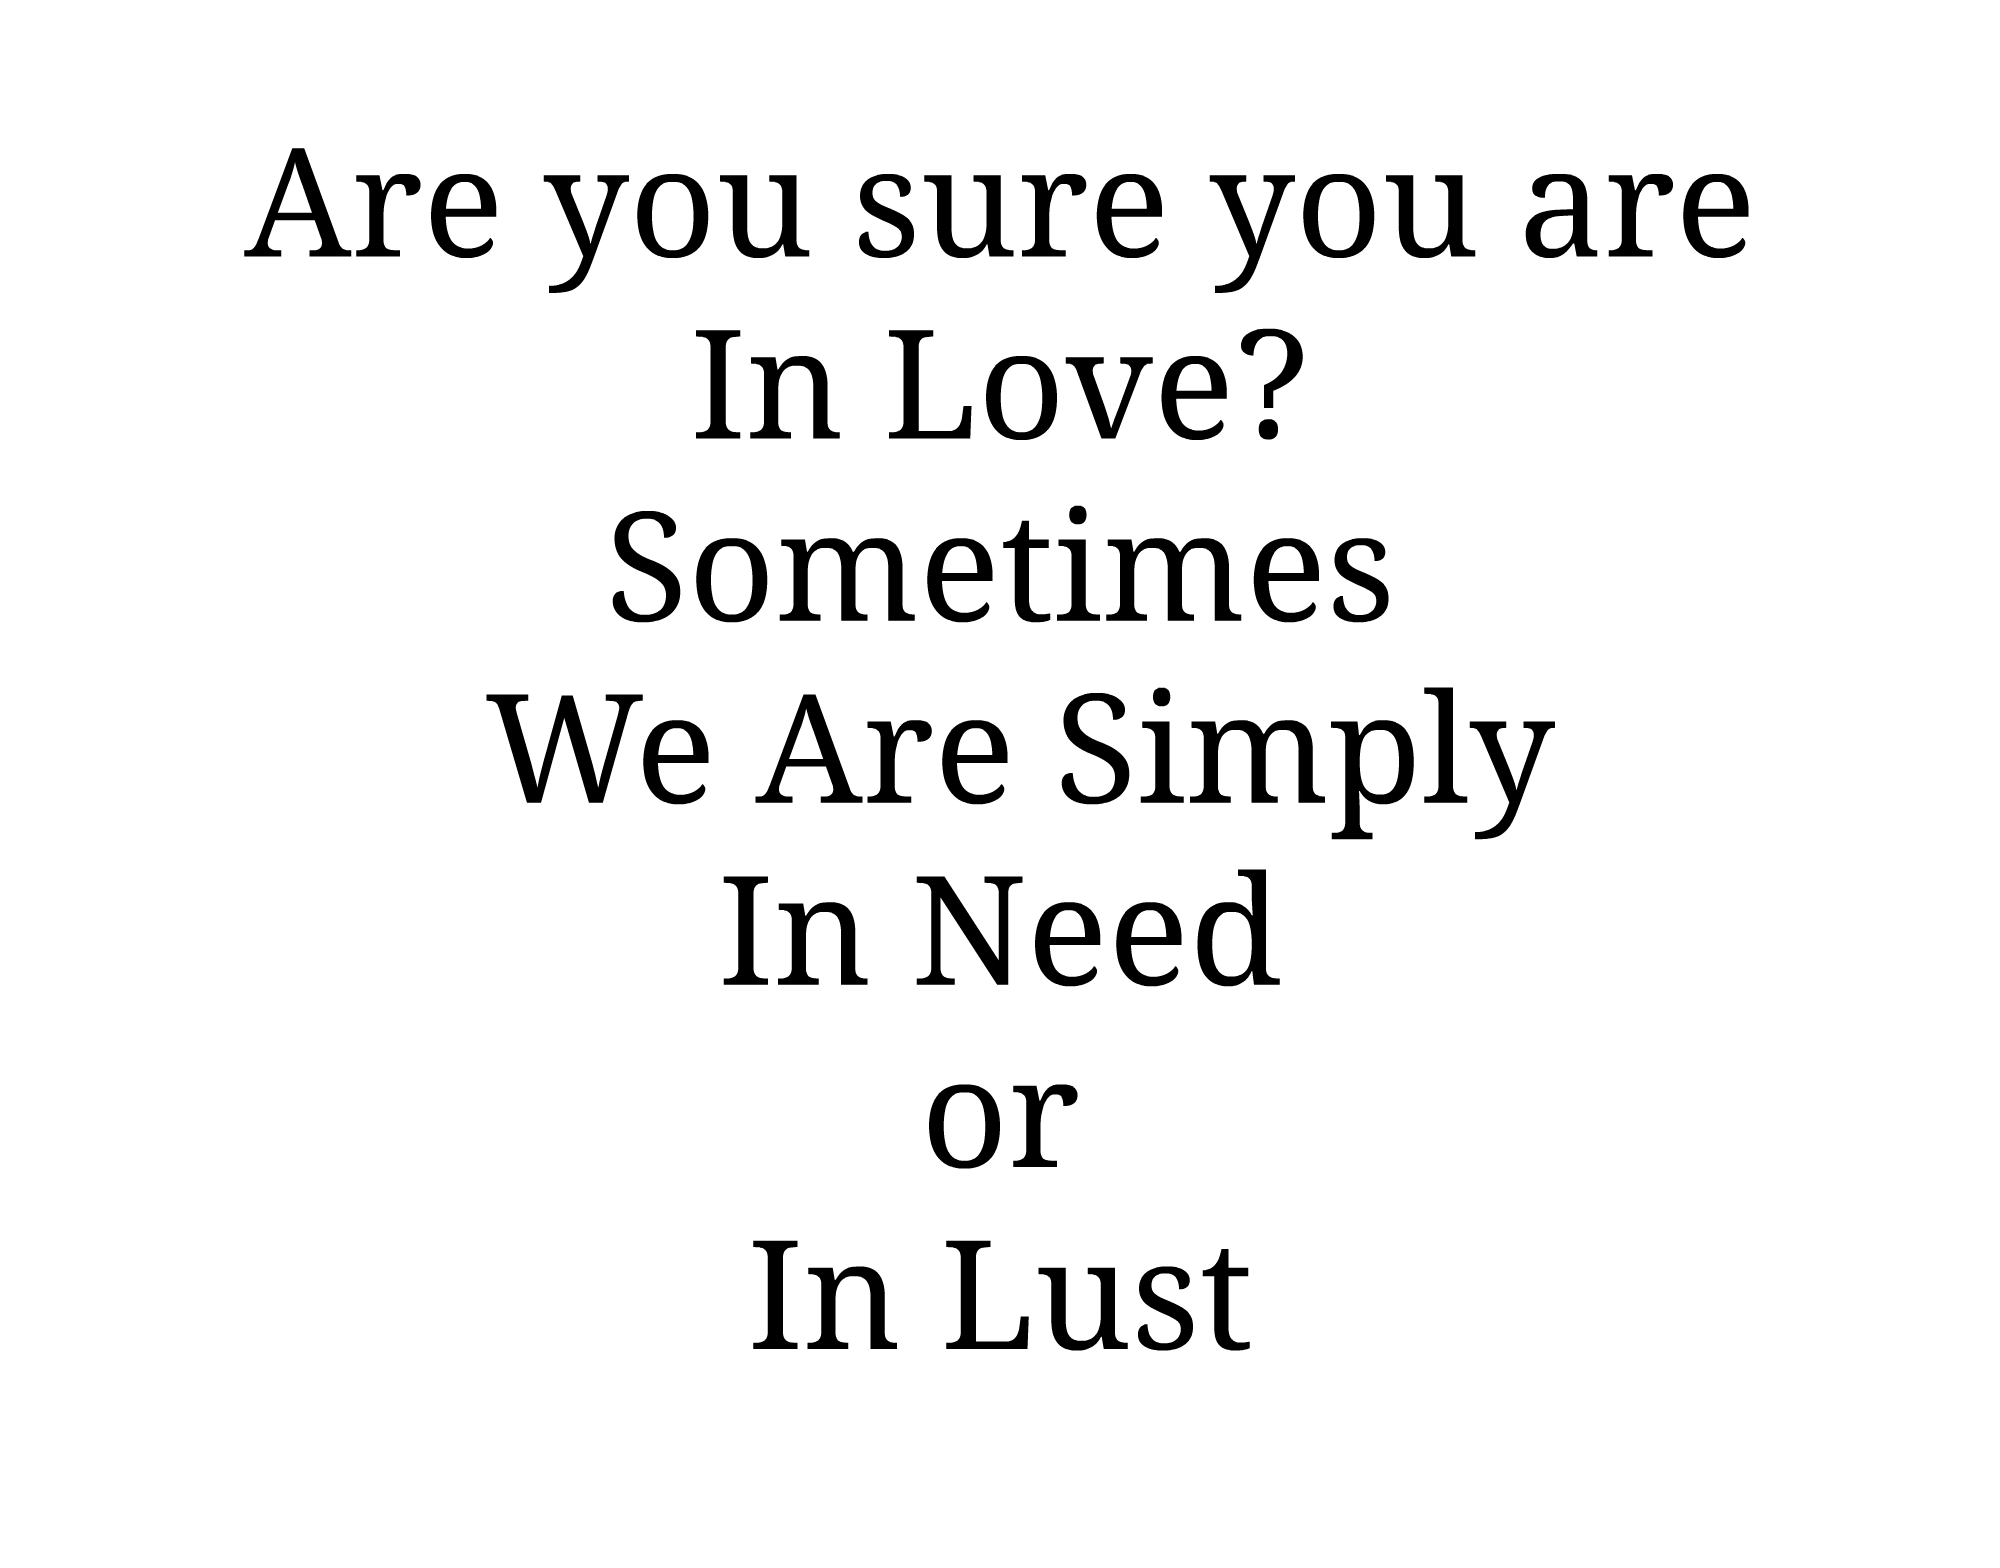 Love, Lust and Need